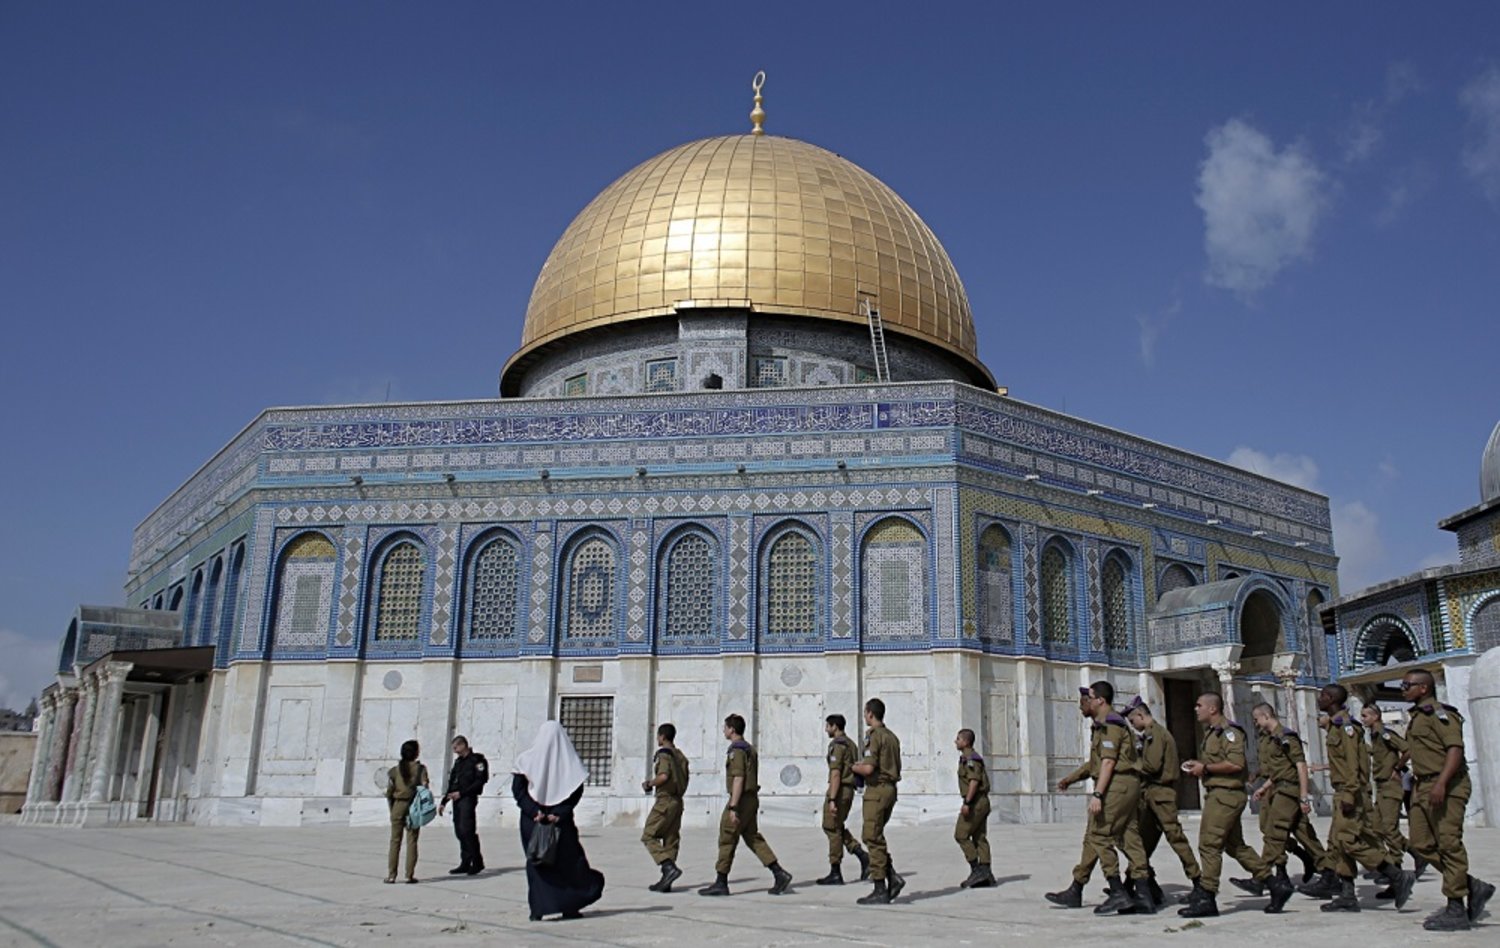 Israeli soldiers walk past the Dome of the Rock in the Al-Aqsa mosque compound. (AFP)